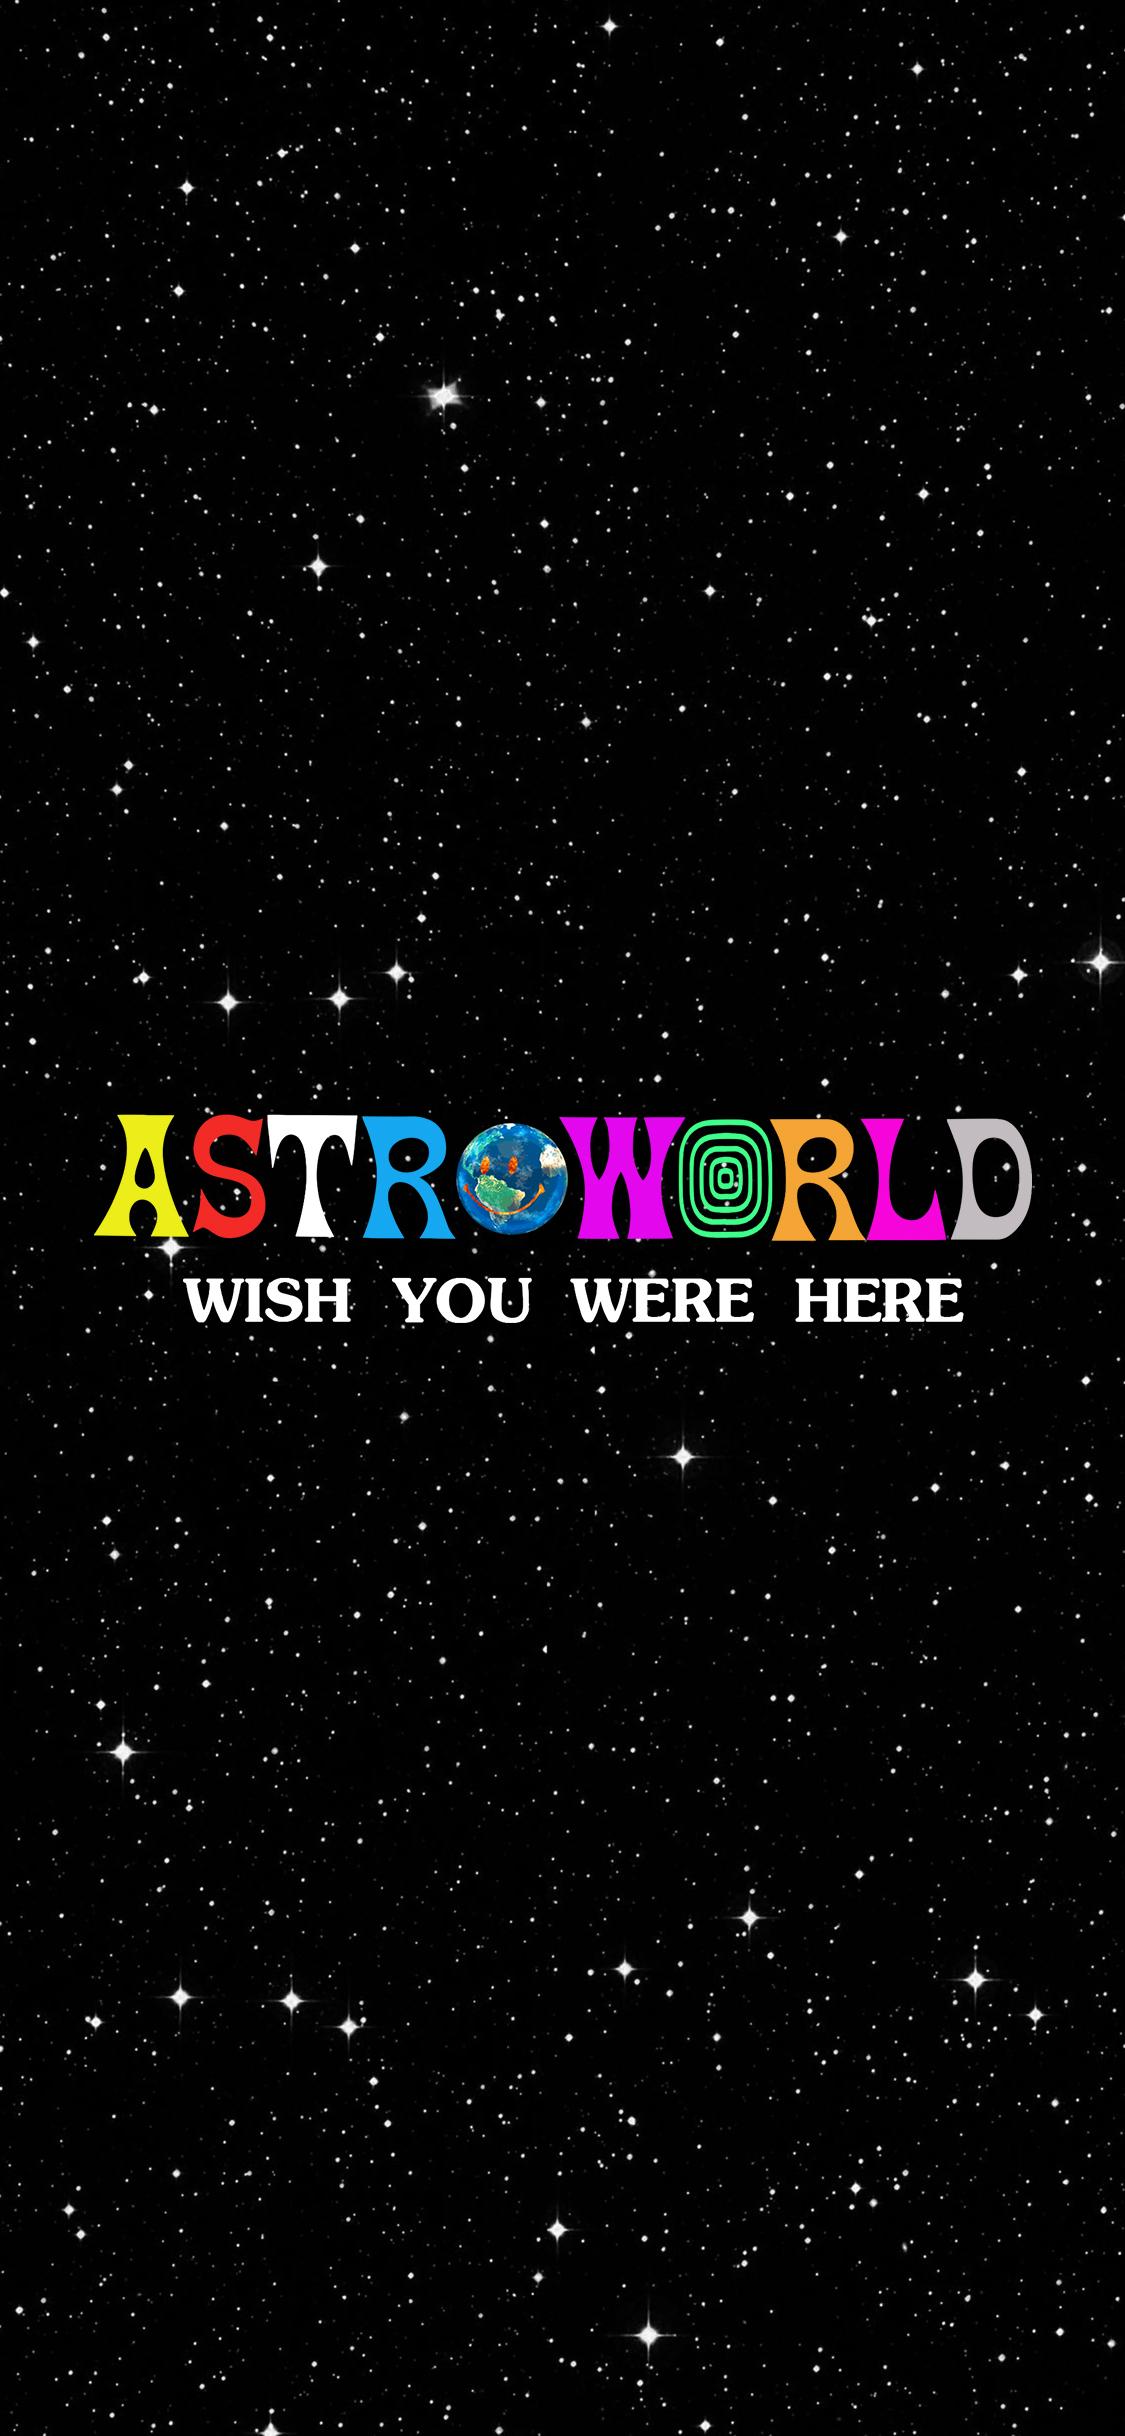 Astroworld Phone Wallpaper Awesome HD